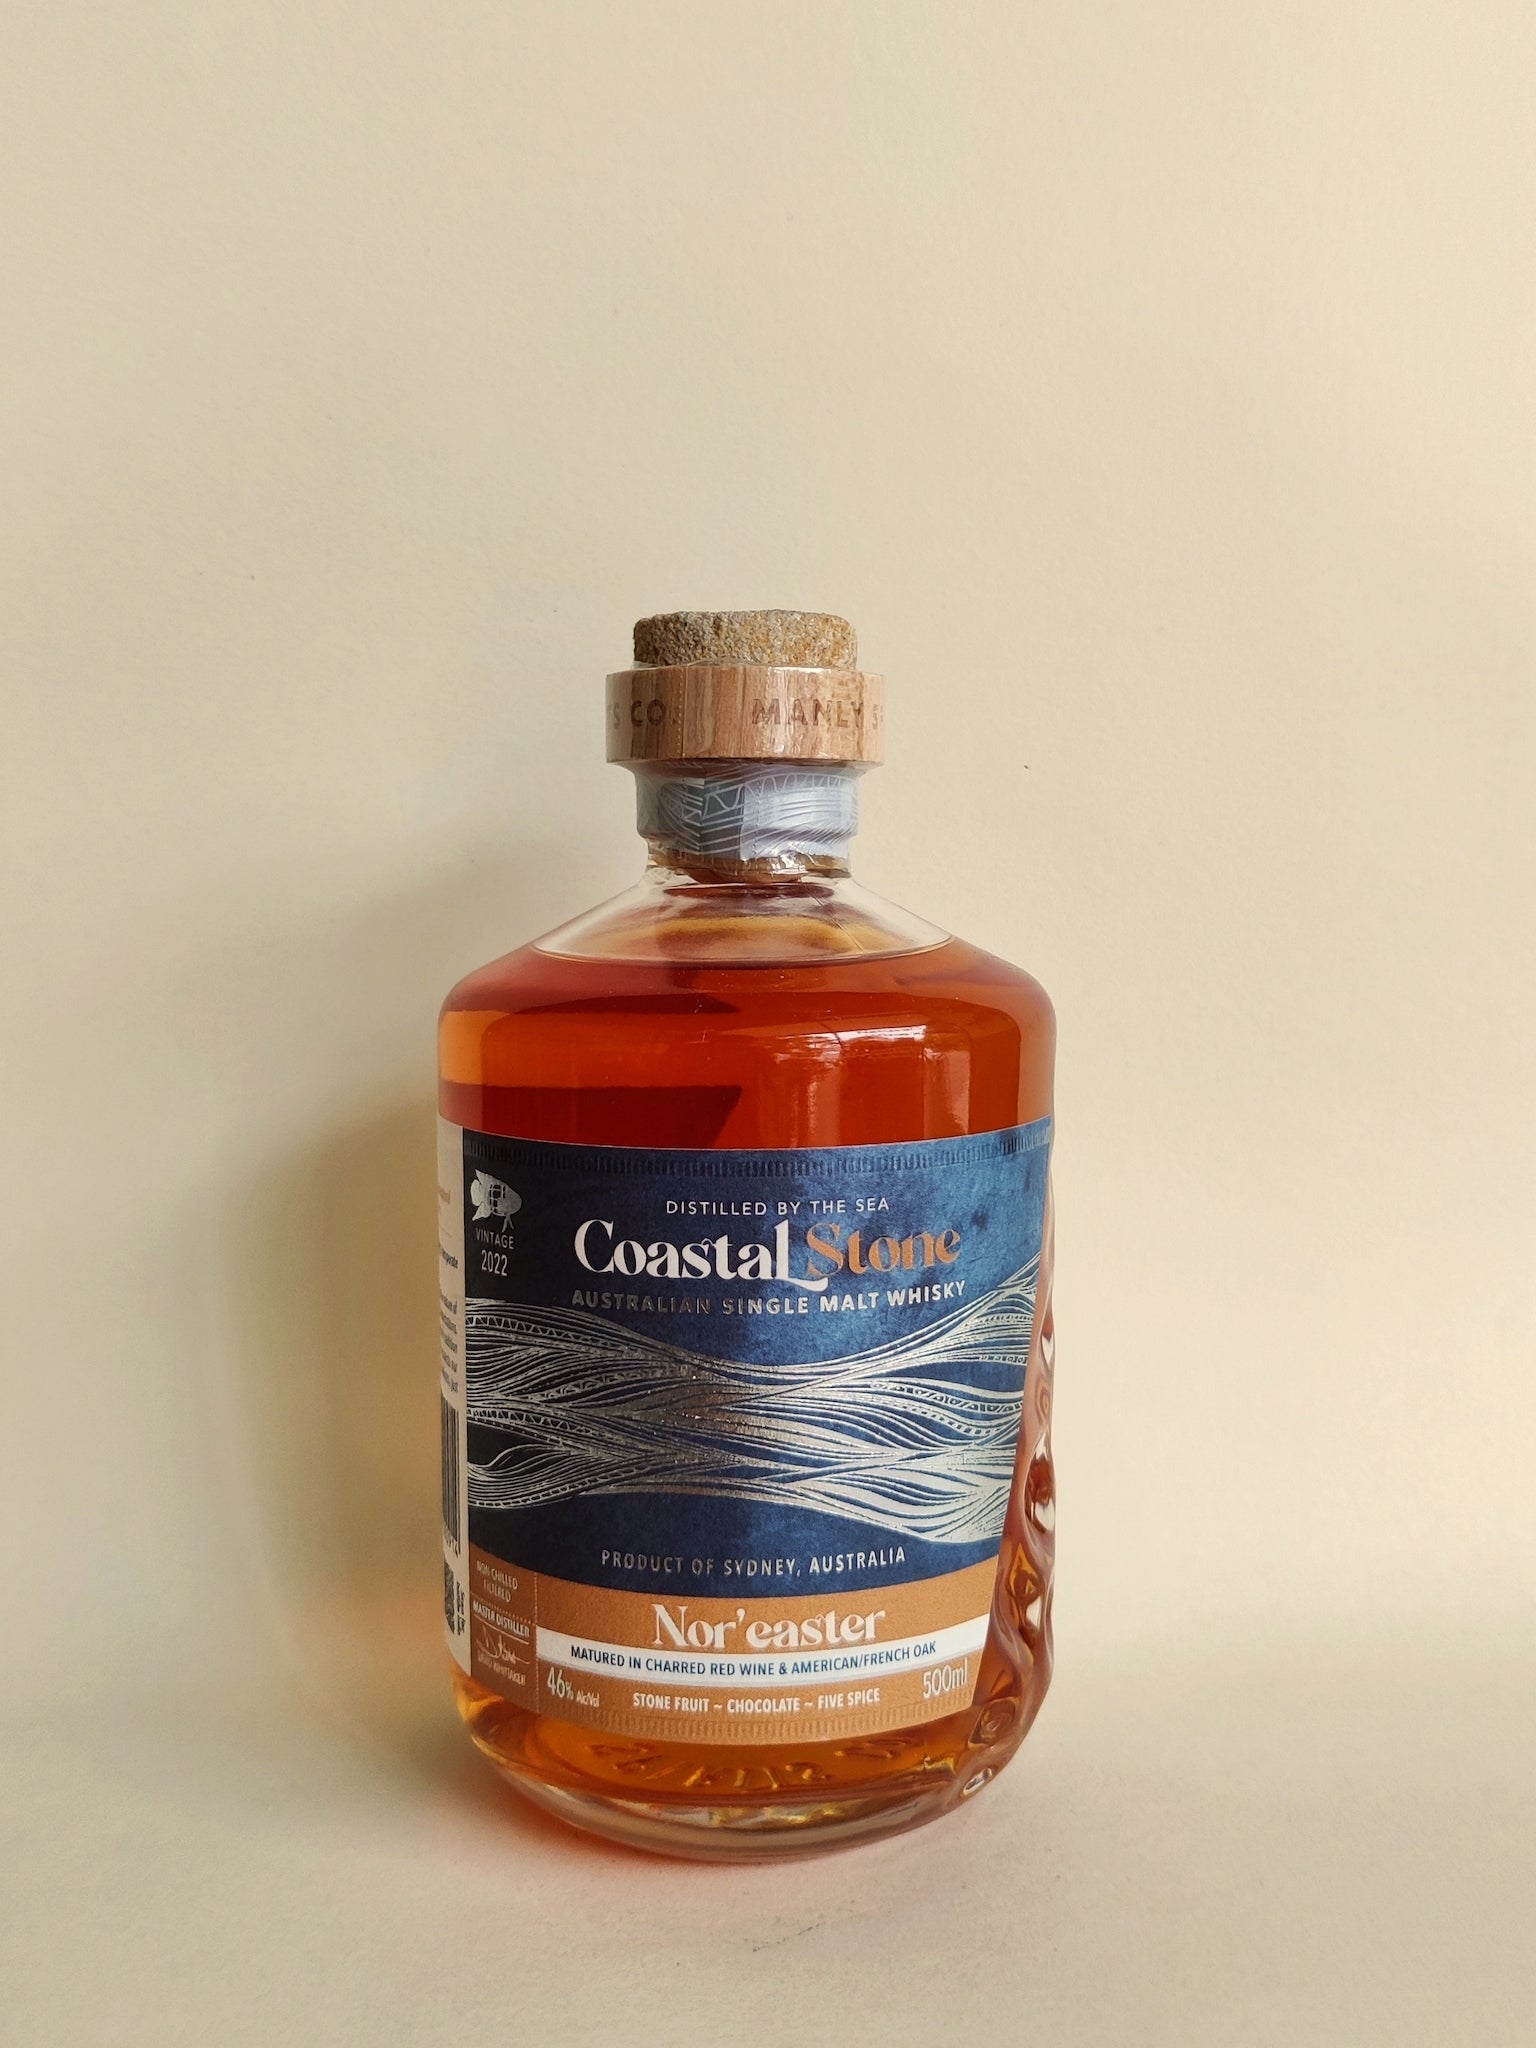 A 500ml bottle of Manly Spirits Nor-easter Australian Whisky from New South Wales.